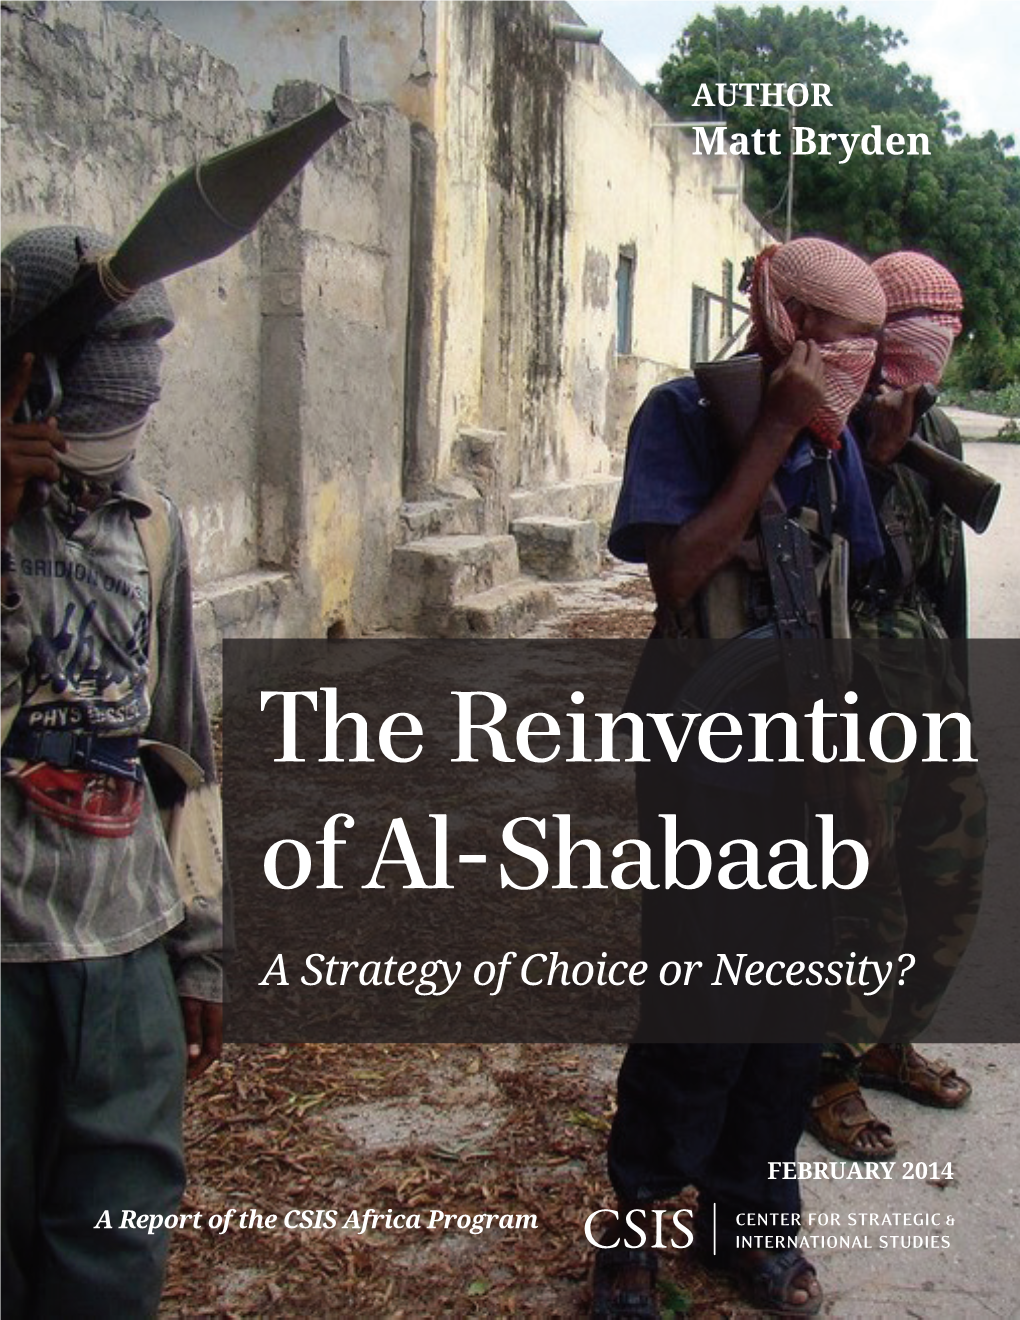 The Reinvention of Al-Shabaab: a Strategy of Choice Or Necessity?